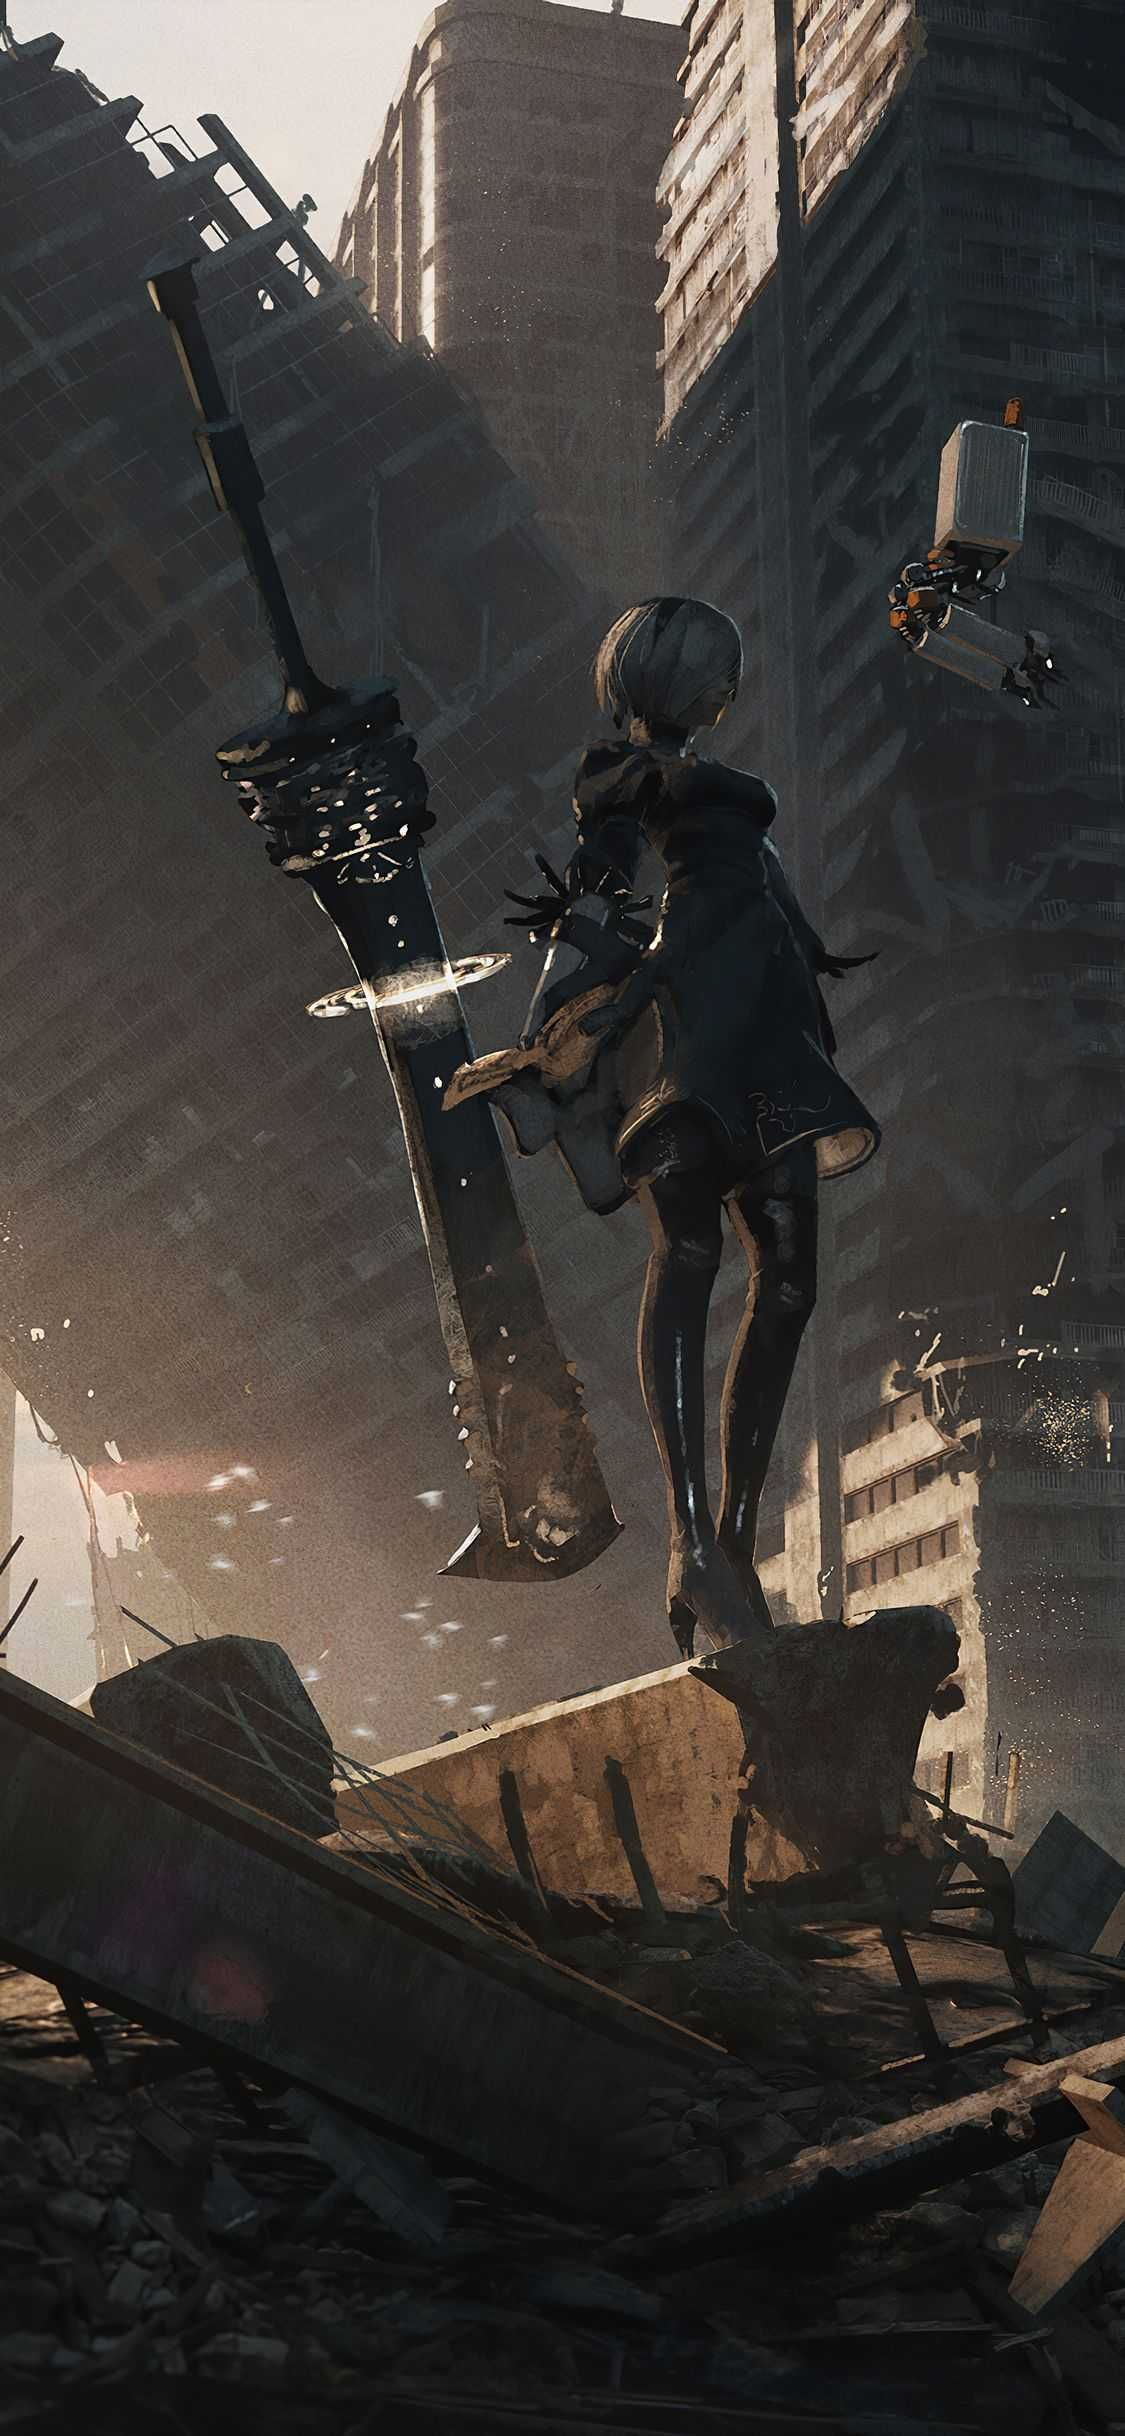 1125x2436 Nier Automata Wallpaper Android Discover more 2B, Games, NieR, NieR Automata, Yorha wallpaper. ;&#128;&brvbar; | Nier automata, Automata, Neir automata